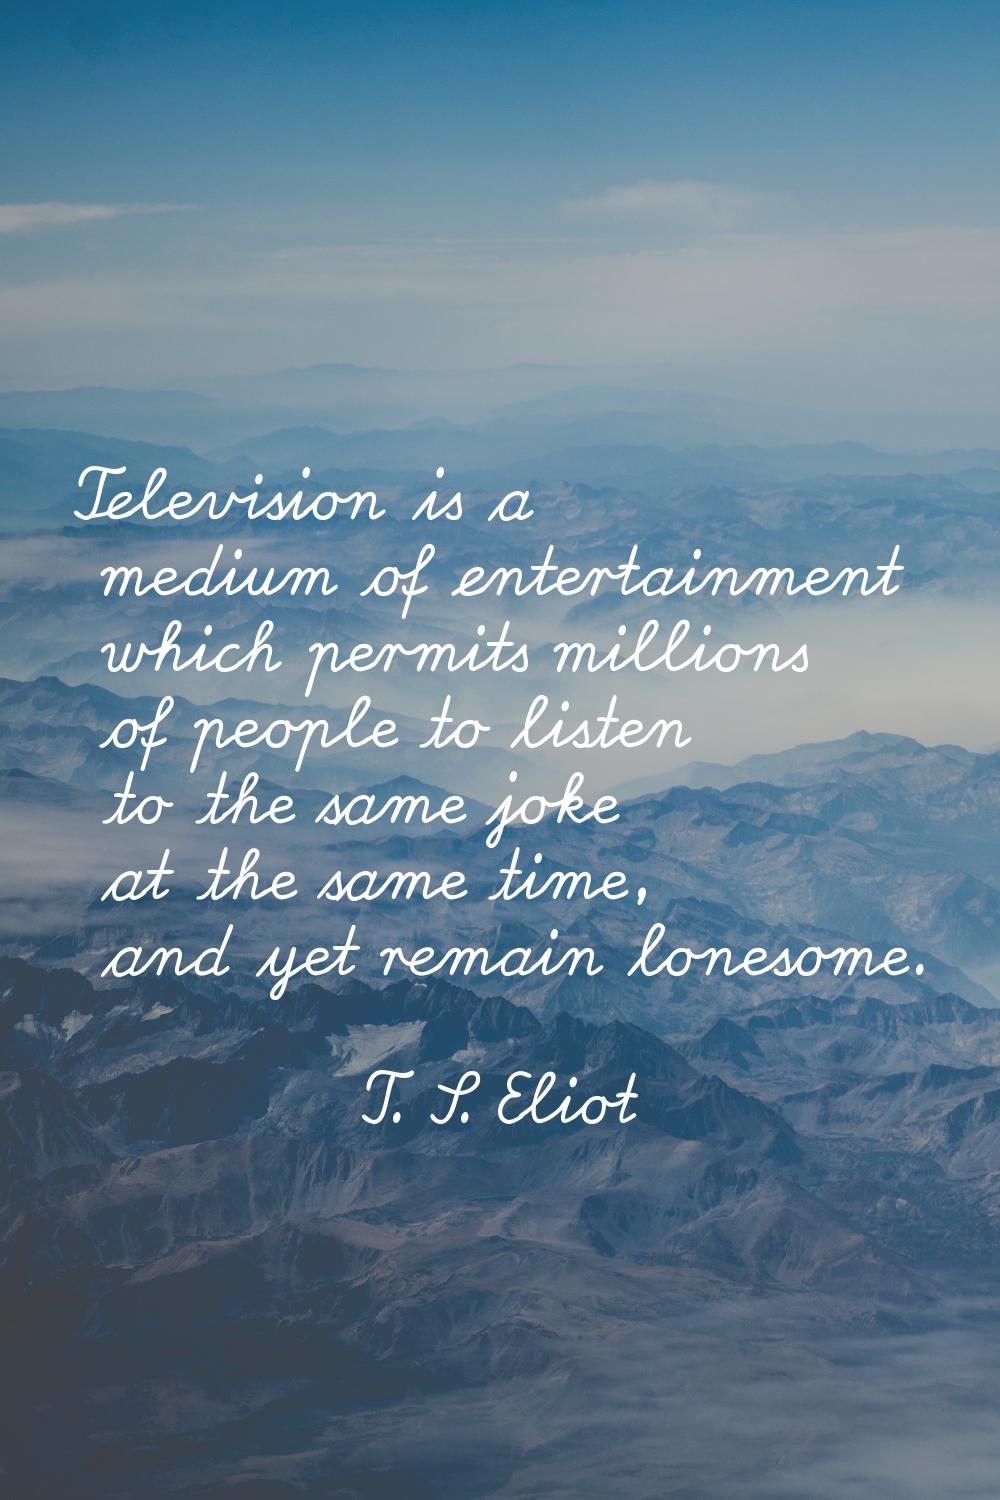 Television is a medium of entertainment which permits millions of people to listen to the same joke